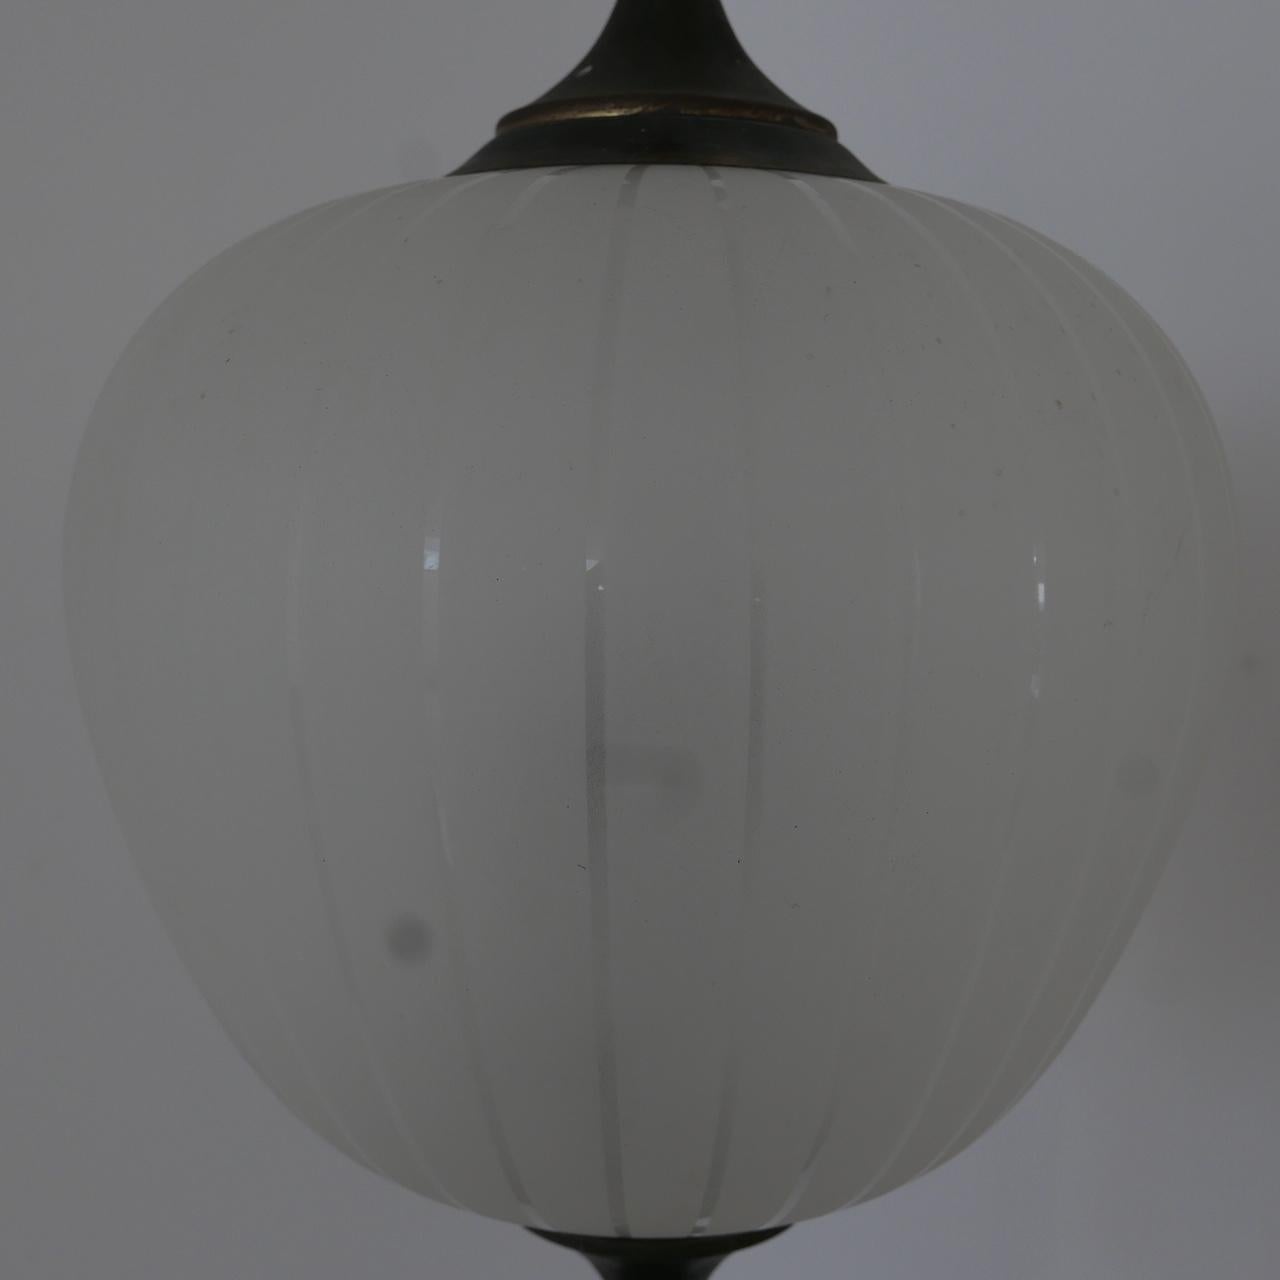 An Italian midcentury two-tone pendant light.

Etched glass with clear stripes.

Patinated brass gallery and base.

Re-wired and ready to hang.

Dimensions: 59 height x 28 diameter to the top of the gallery, 15 cm of original chain. No